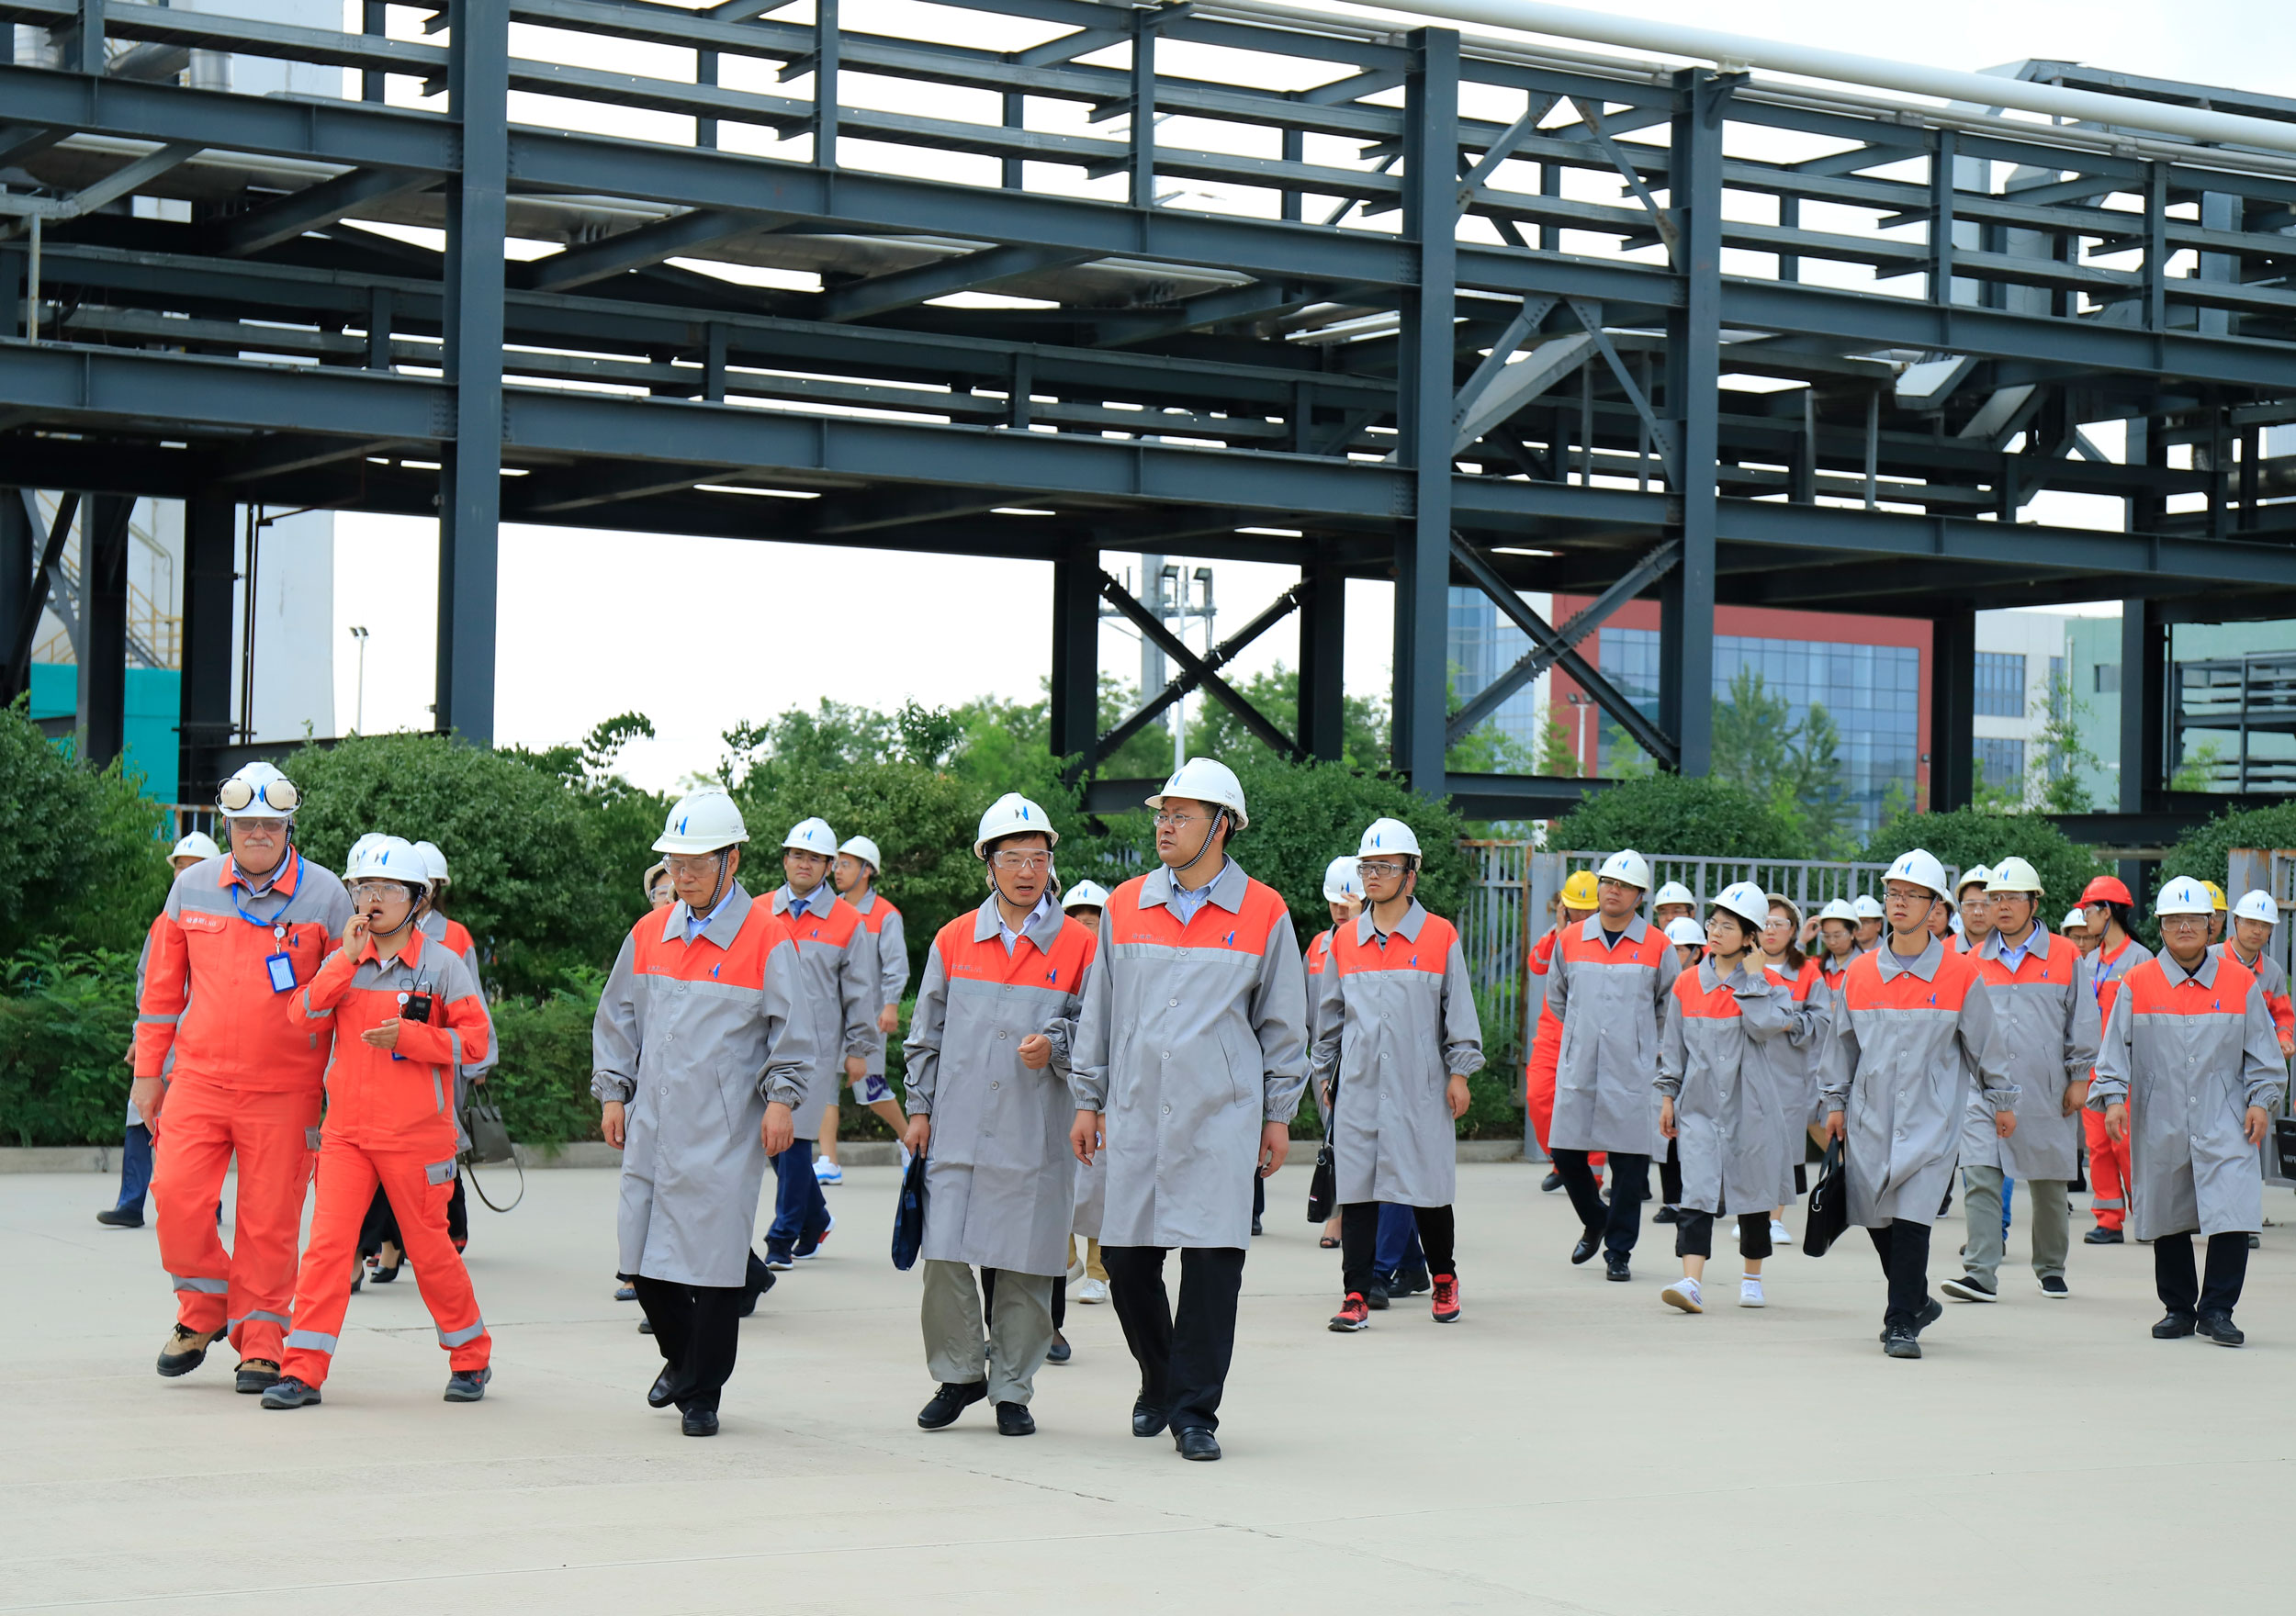 Director of the Department of Emergencies of the Emergency Management Department of the Autonomous Region and representatives of Yinchuan Municipal People’s Congress and CPPCC members surveyed Hanas LNG Factory